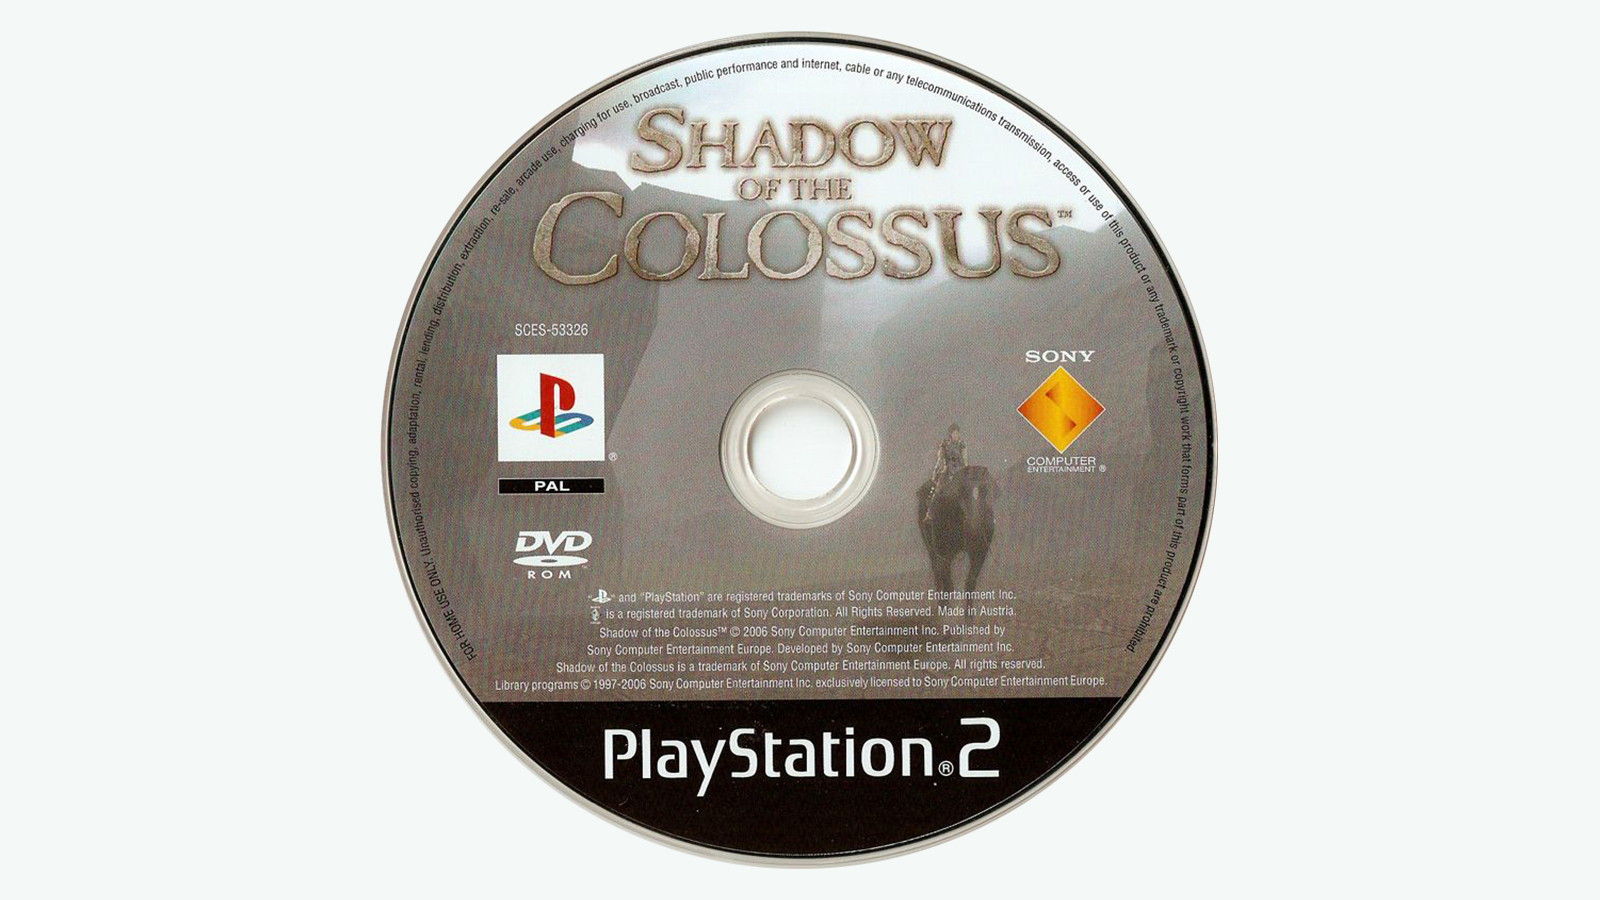 Shadow of the Colossus (Sony PlayStation 2 PS2) *GAME DISC ONLY - TESTED*